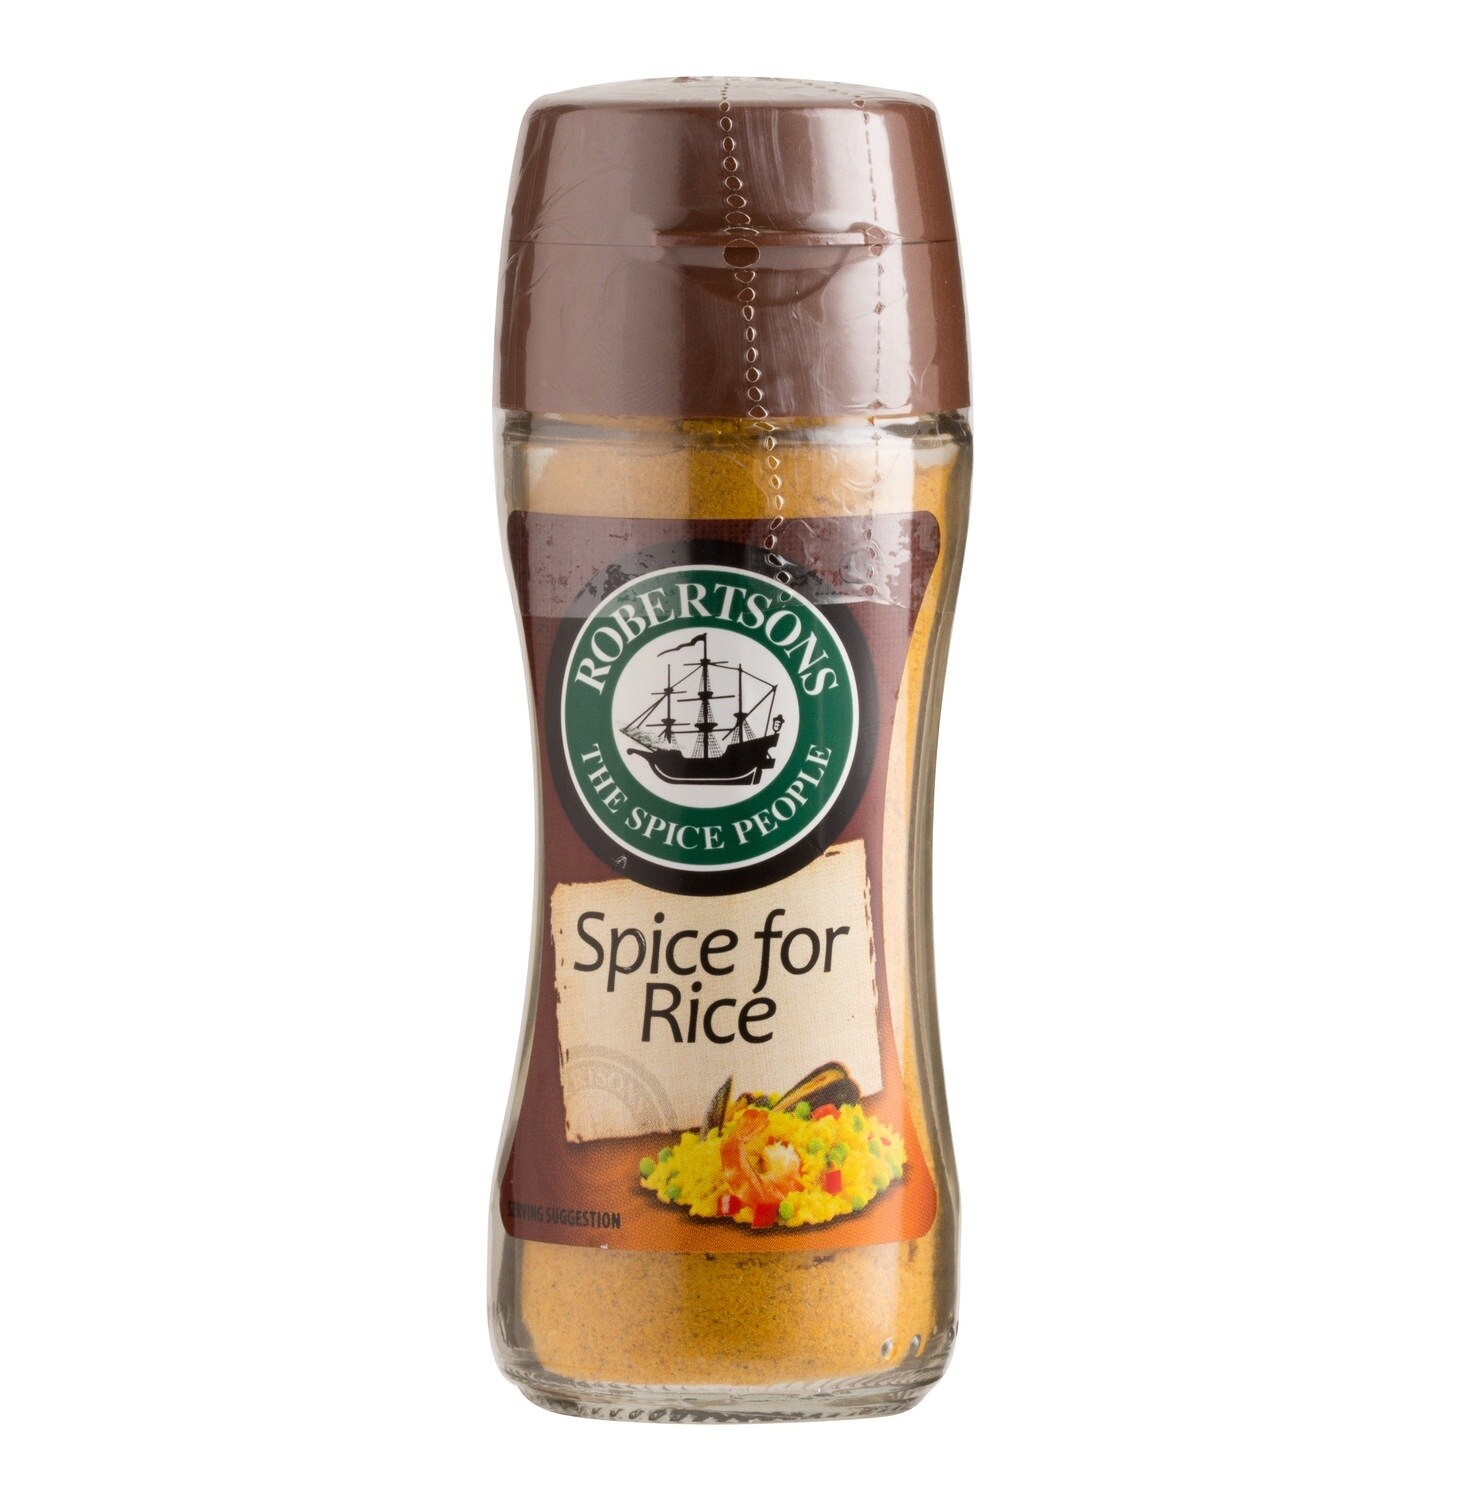 Robertsons Spice for Rice 100ml bottle